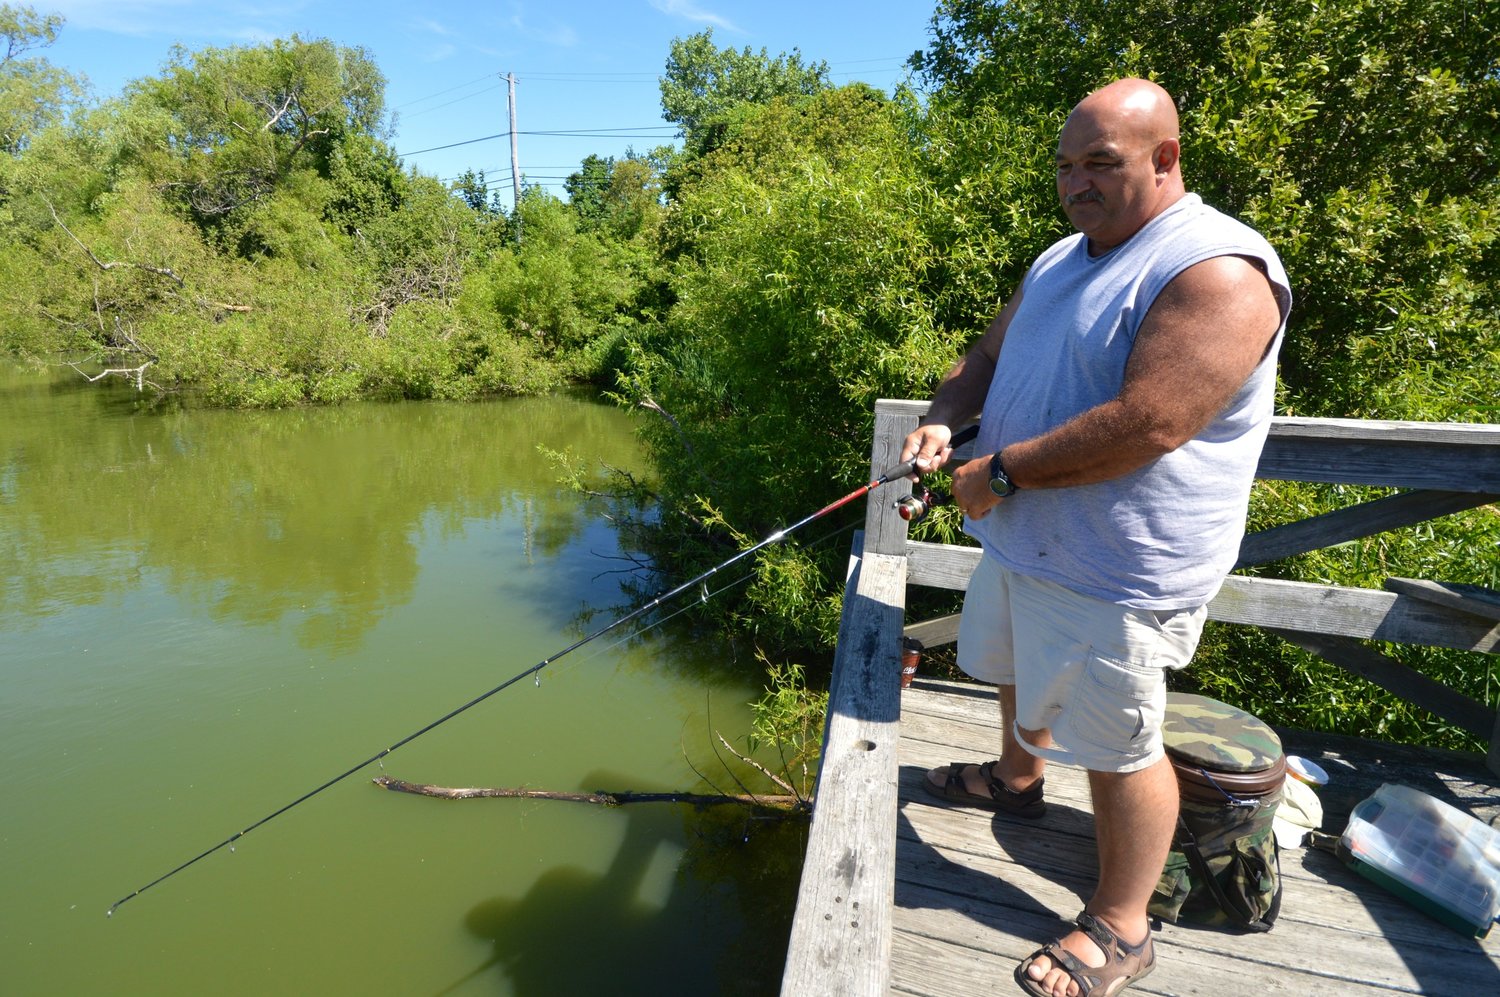 The state says visitors to Thurston Gray Pond, aka Upper Melville Pond, should be careful not to ingest water or eat fish from the pond. All recreation, including fishing, boating, and kayaking, should be avoided.